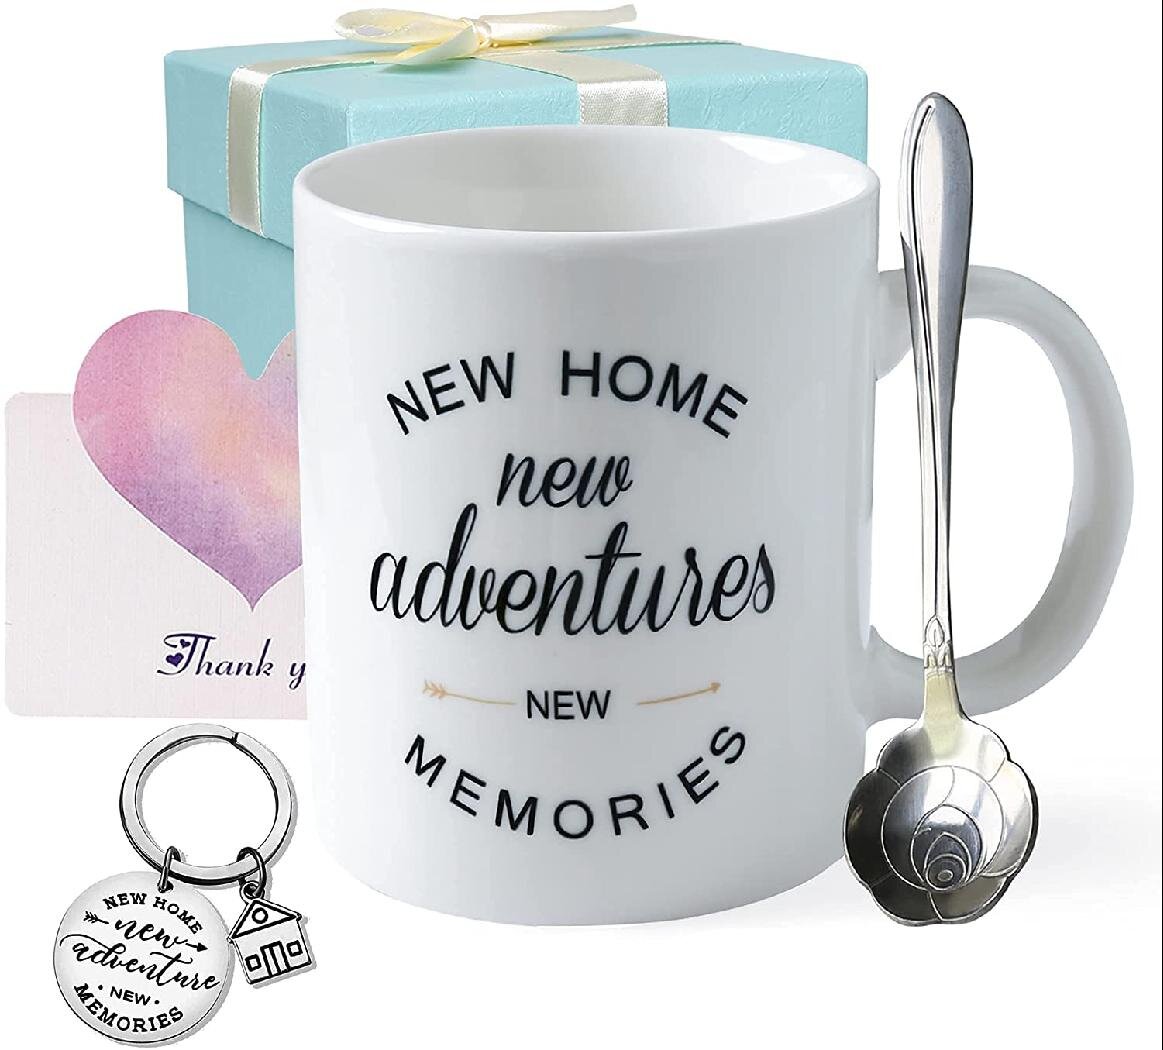 Housewarming gift mug new home gift new house gift new homeowner our first home